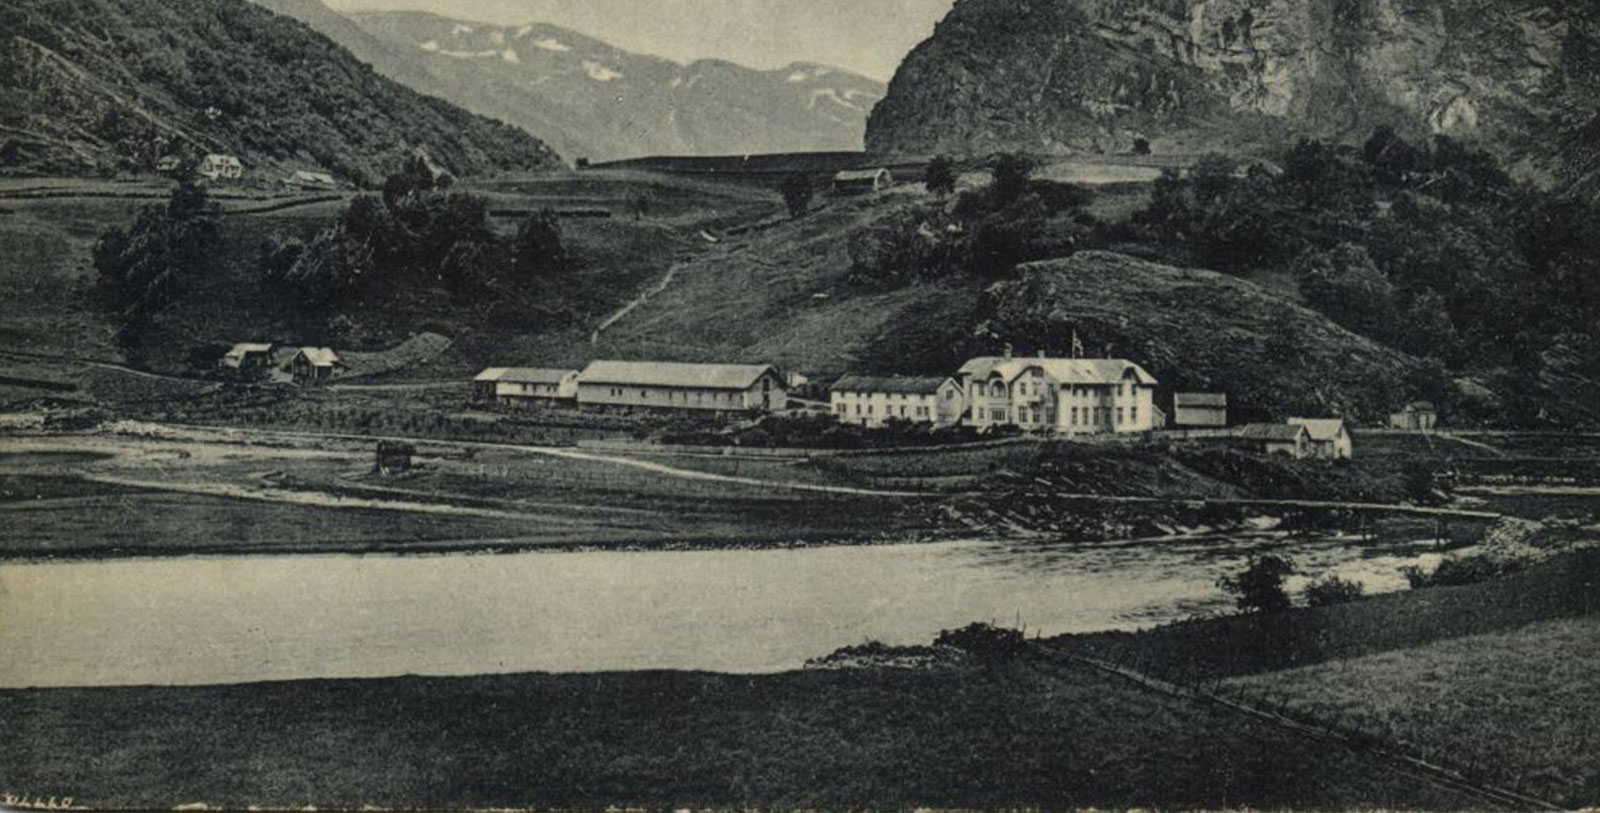 Image of Historic hotel exterior and surroundings, Fretheim Hotel, Flam, Norway, 1870, Member of Historic Hotels Worldwide, Discover